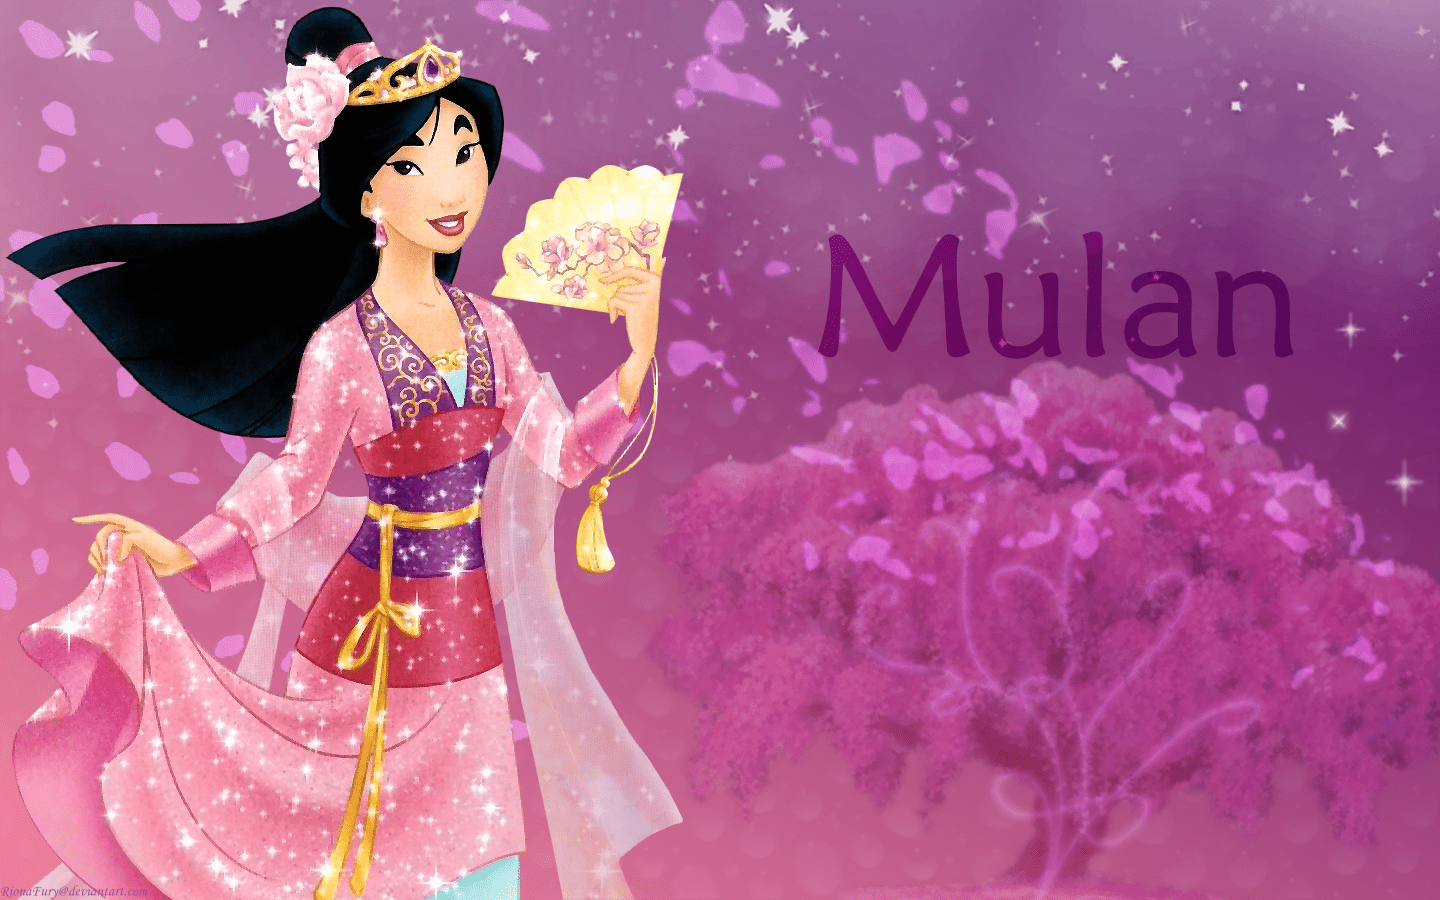 Mulan Wallpapers by Iconfactory on Dribbble